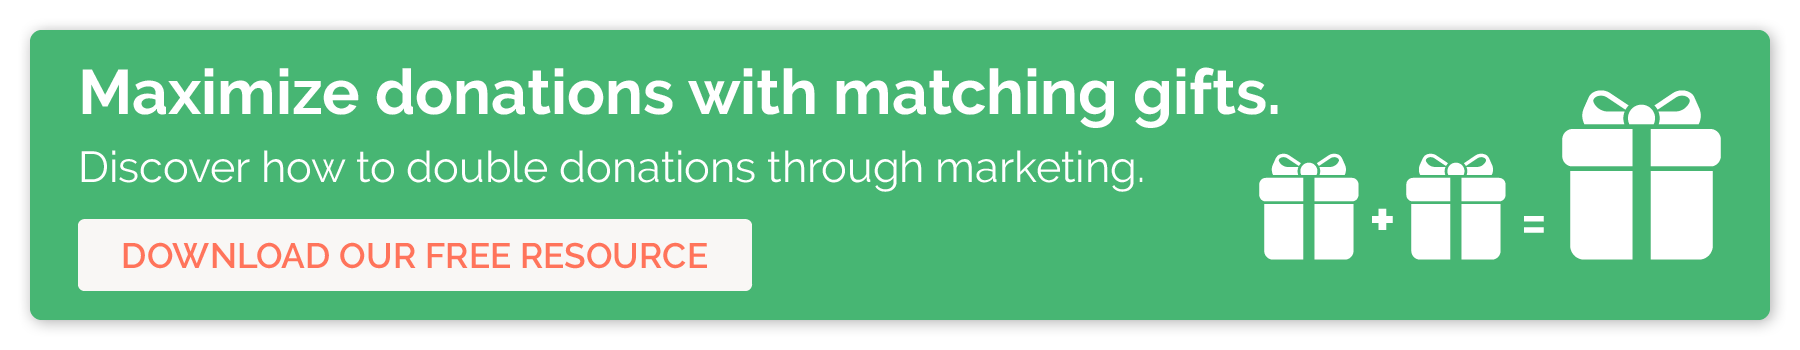 Click to download our free matching gifts resource to help you maximize donations.